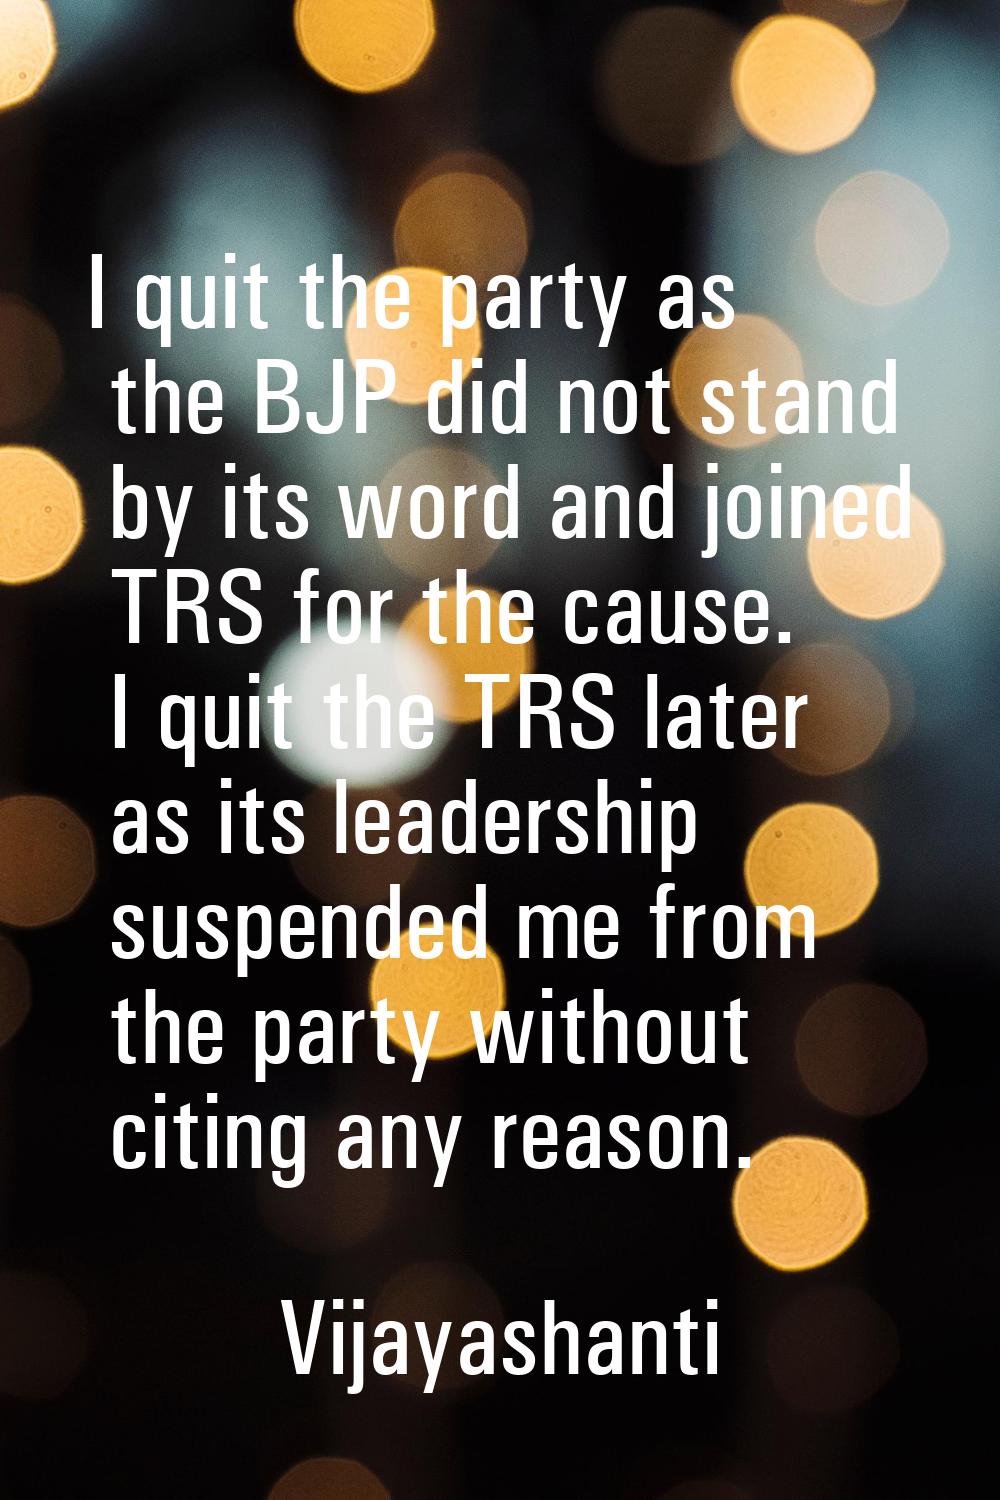 I quit the party as the BJP did not stand by its word and joined TRS for the cause. I quit the TRS 